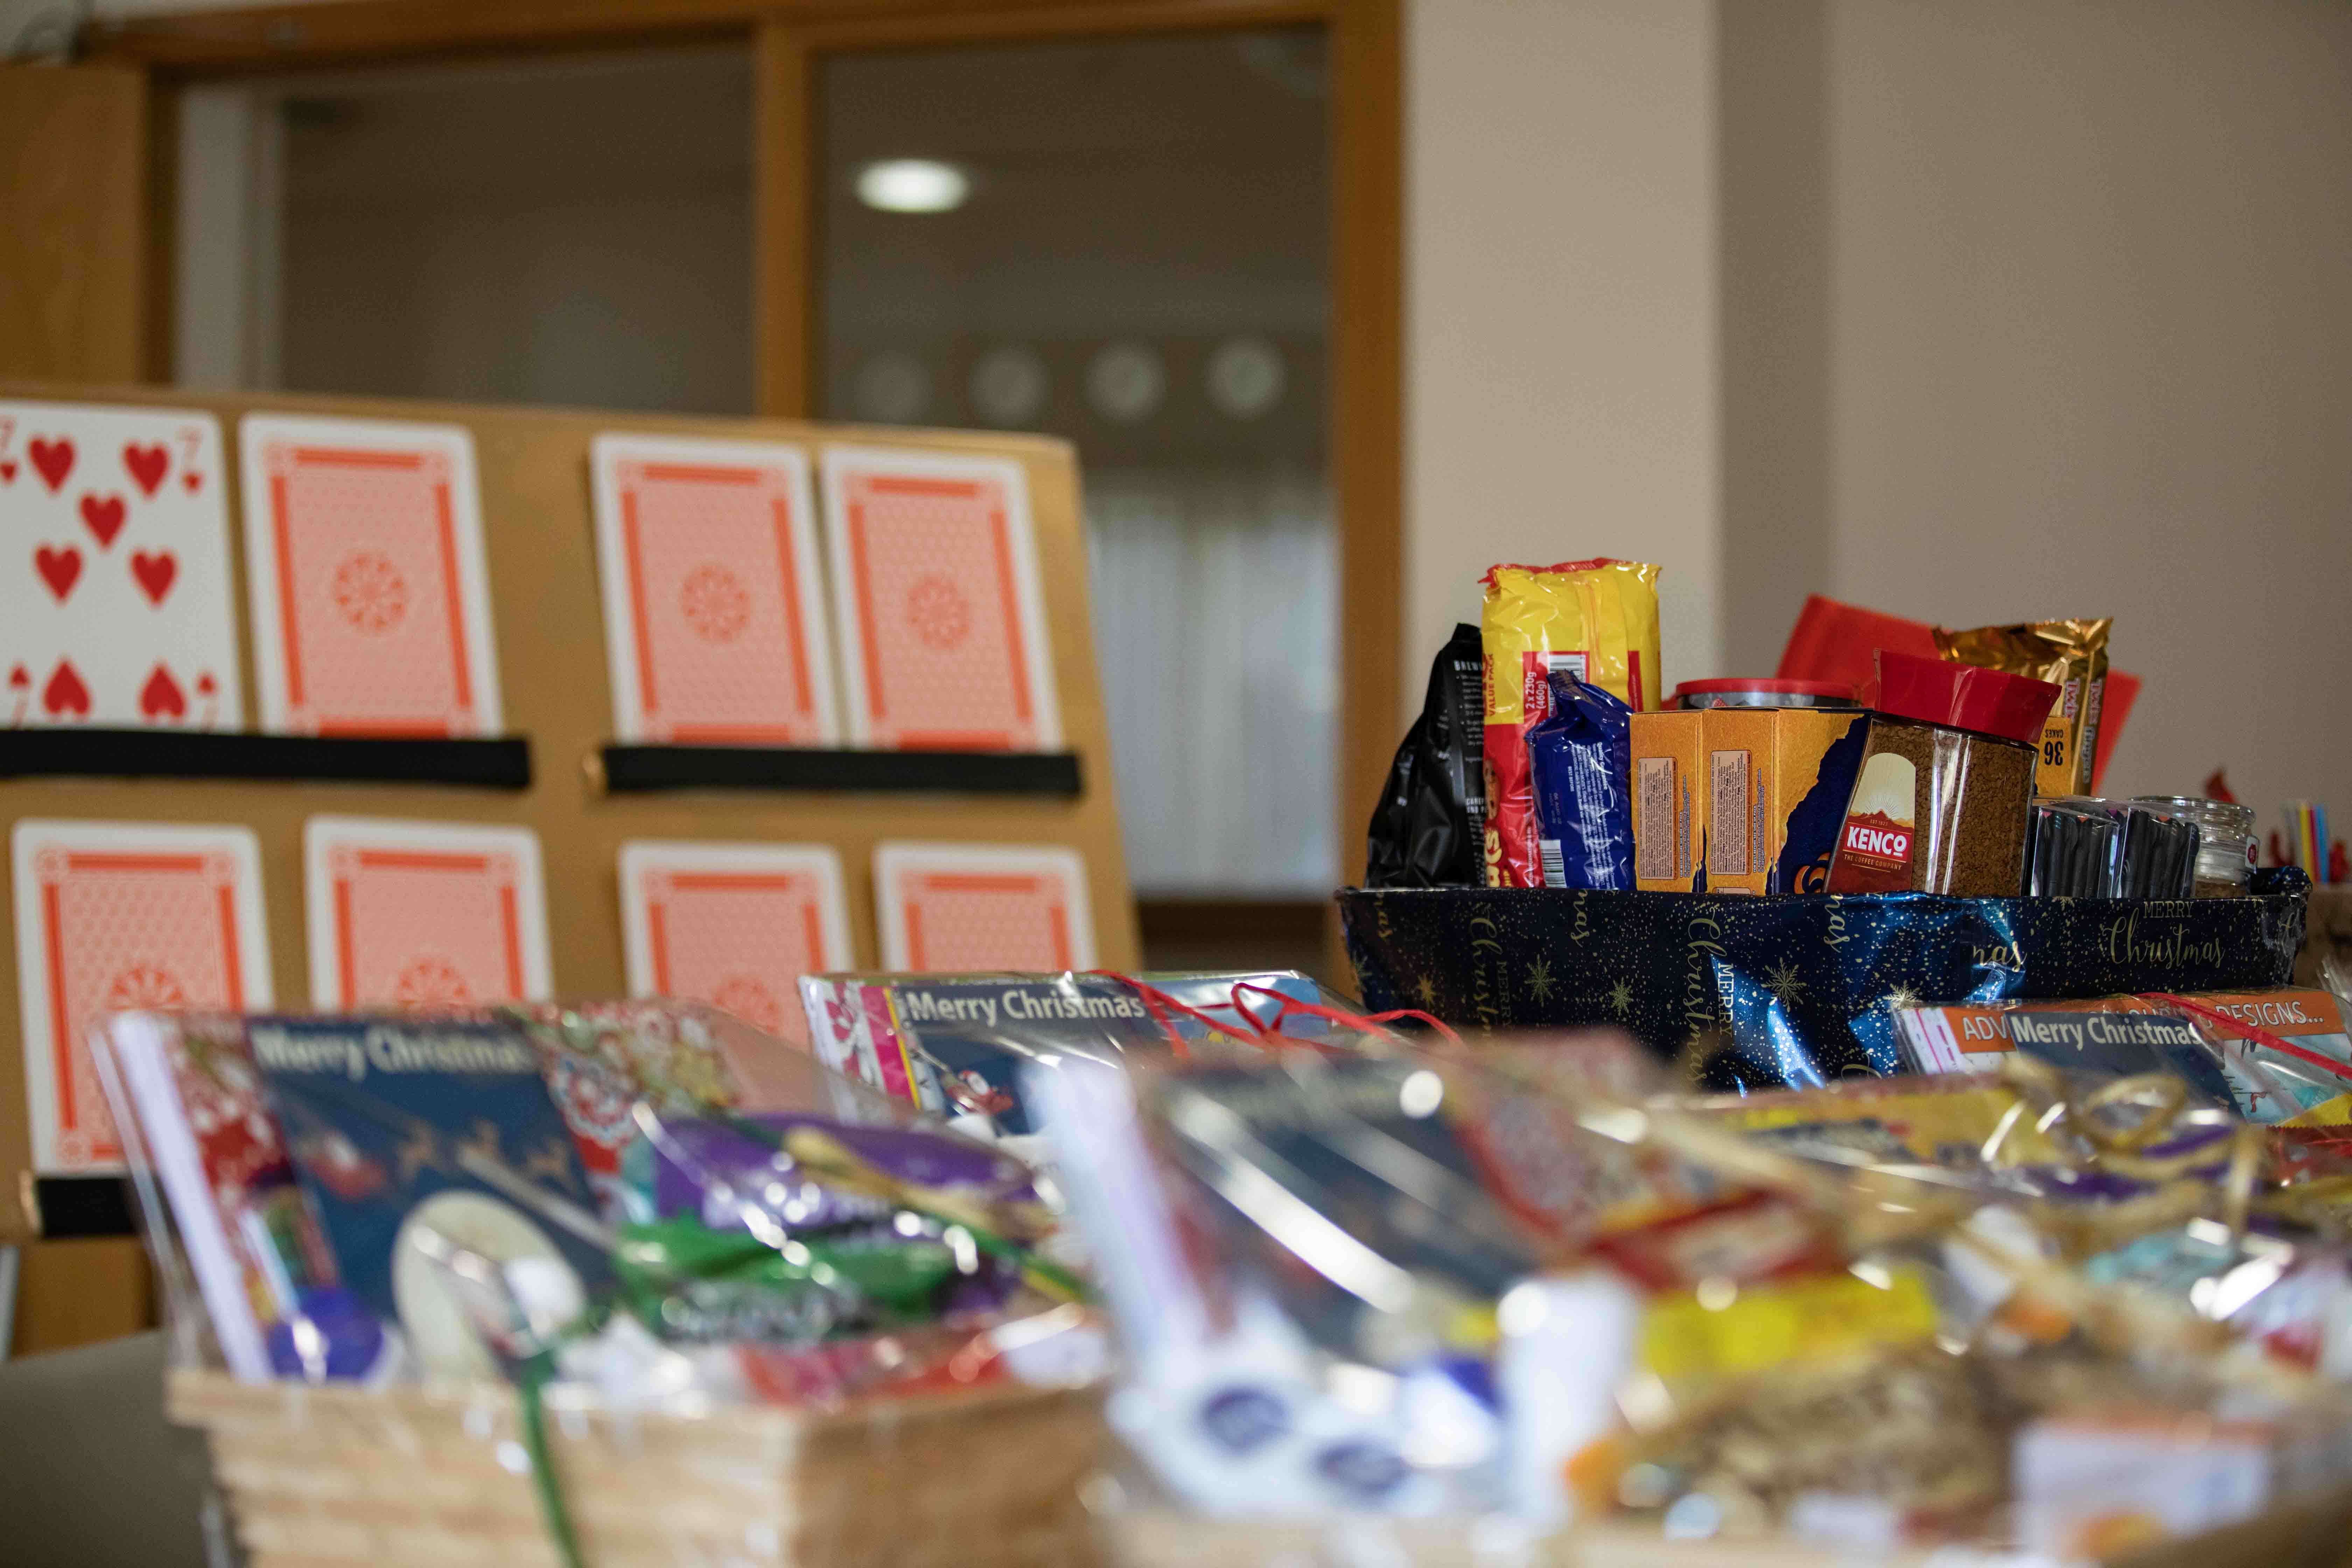 The hampers with the ‘Play Your Cards Right’ board in the background